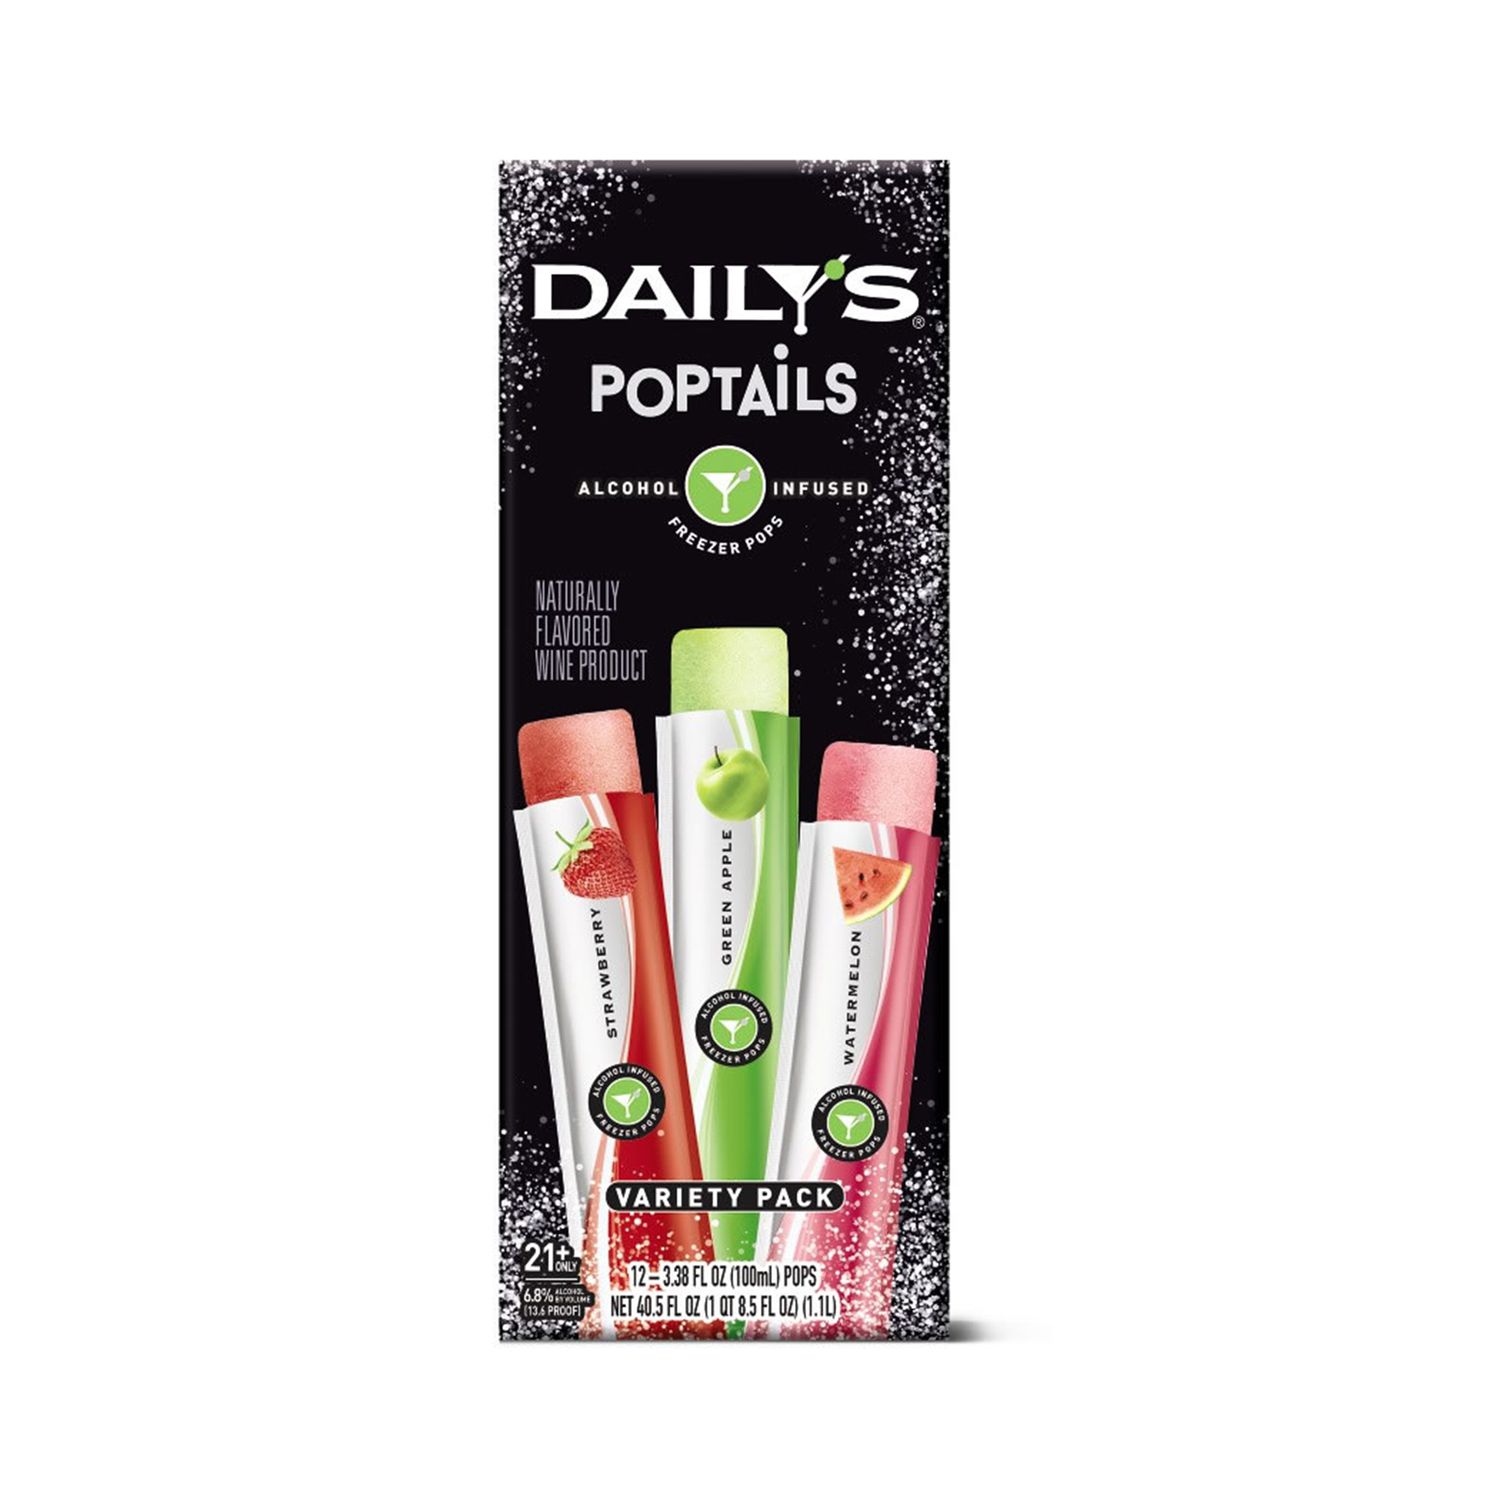 Daily’s Poptails